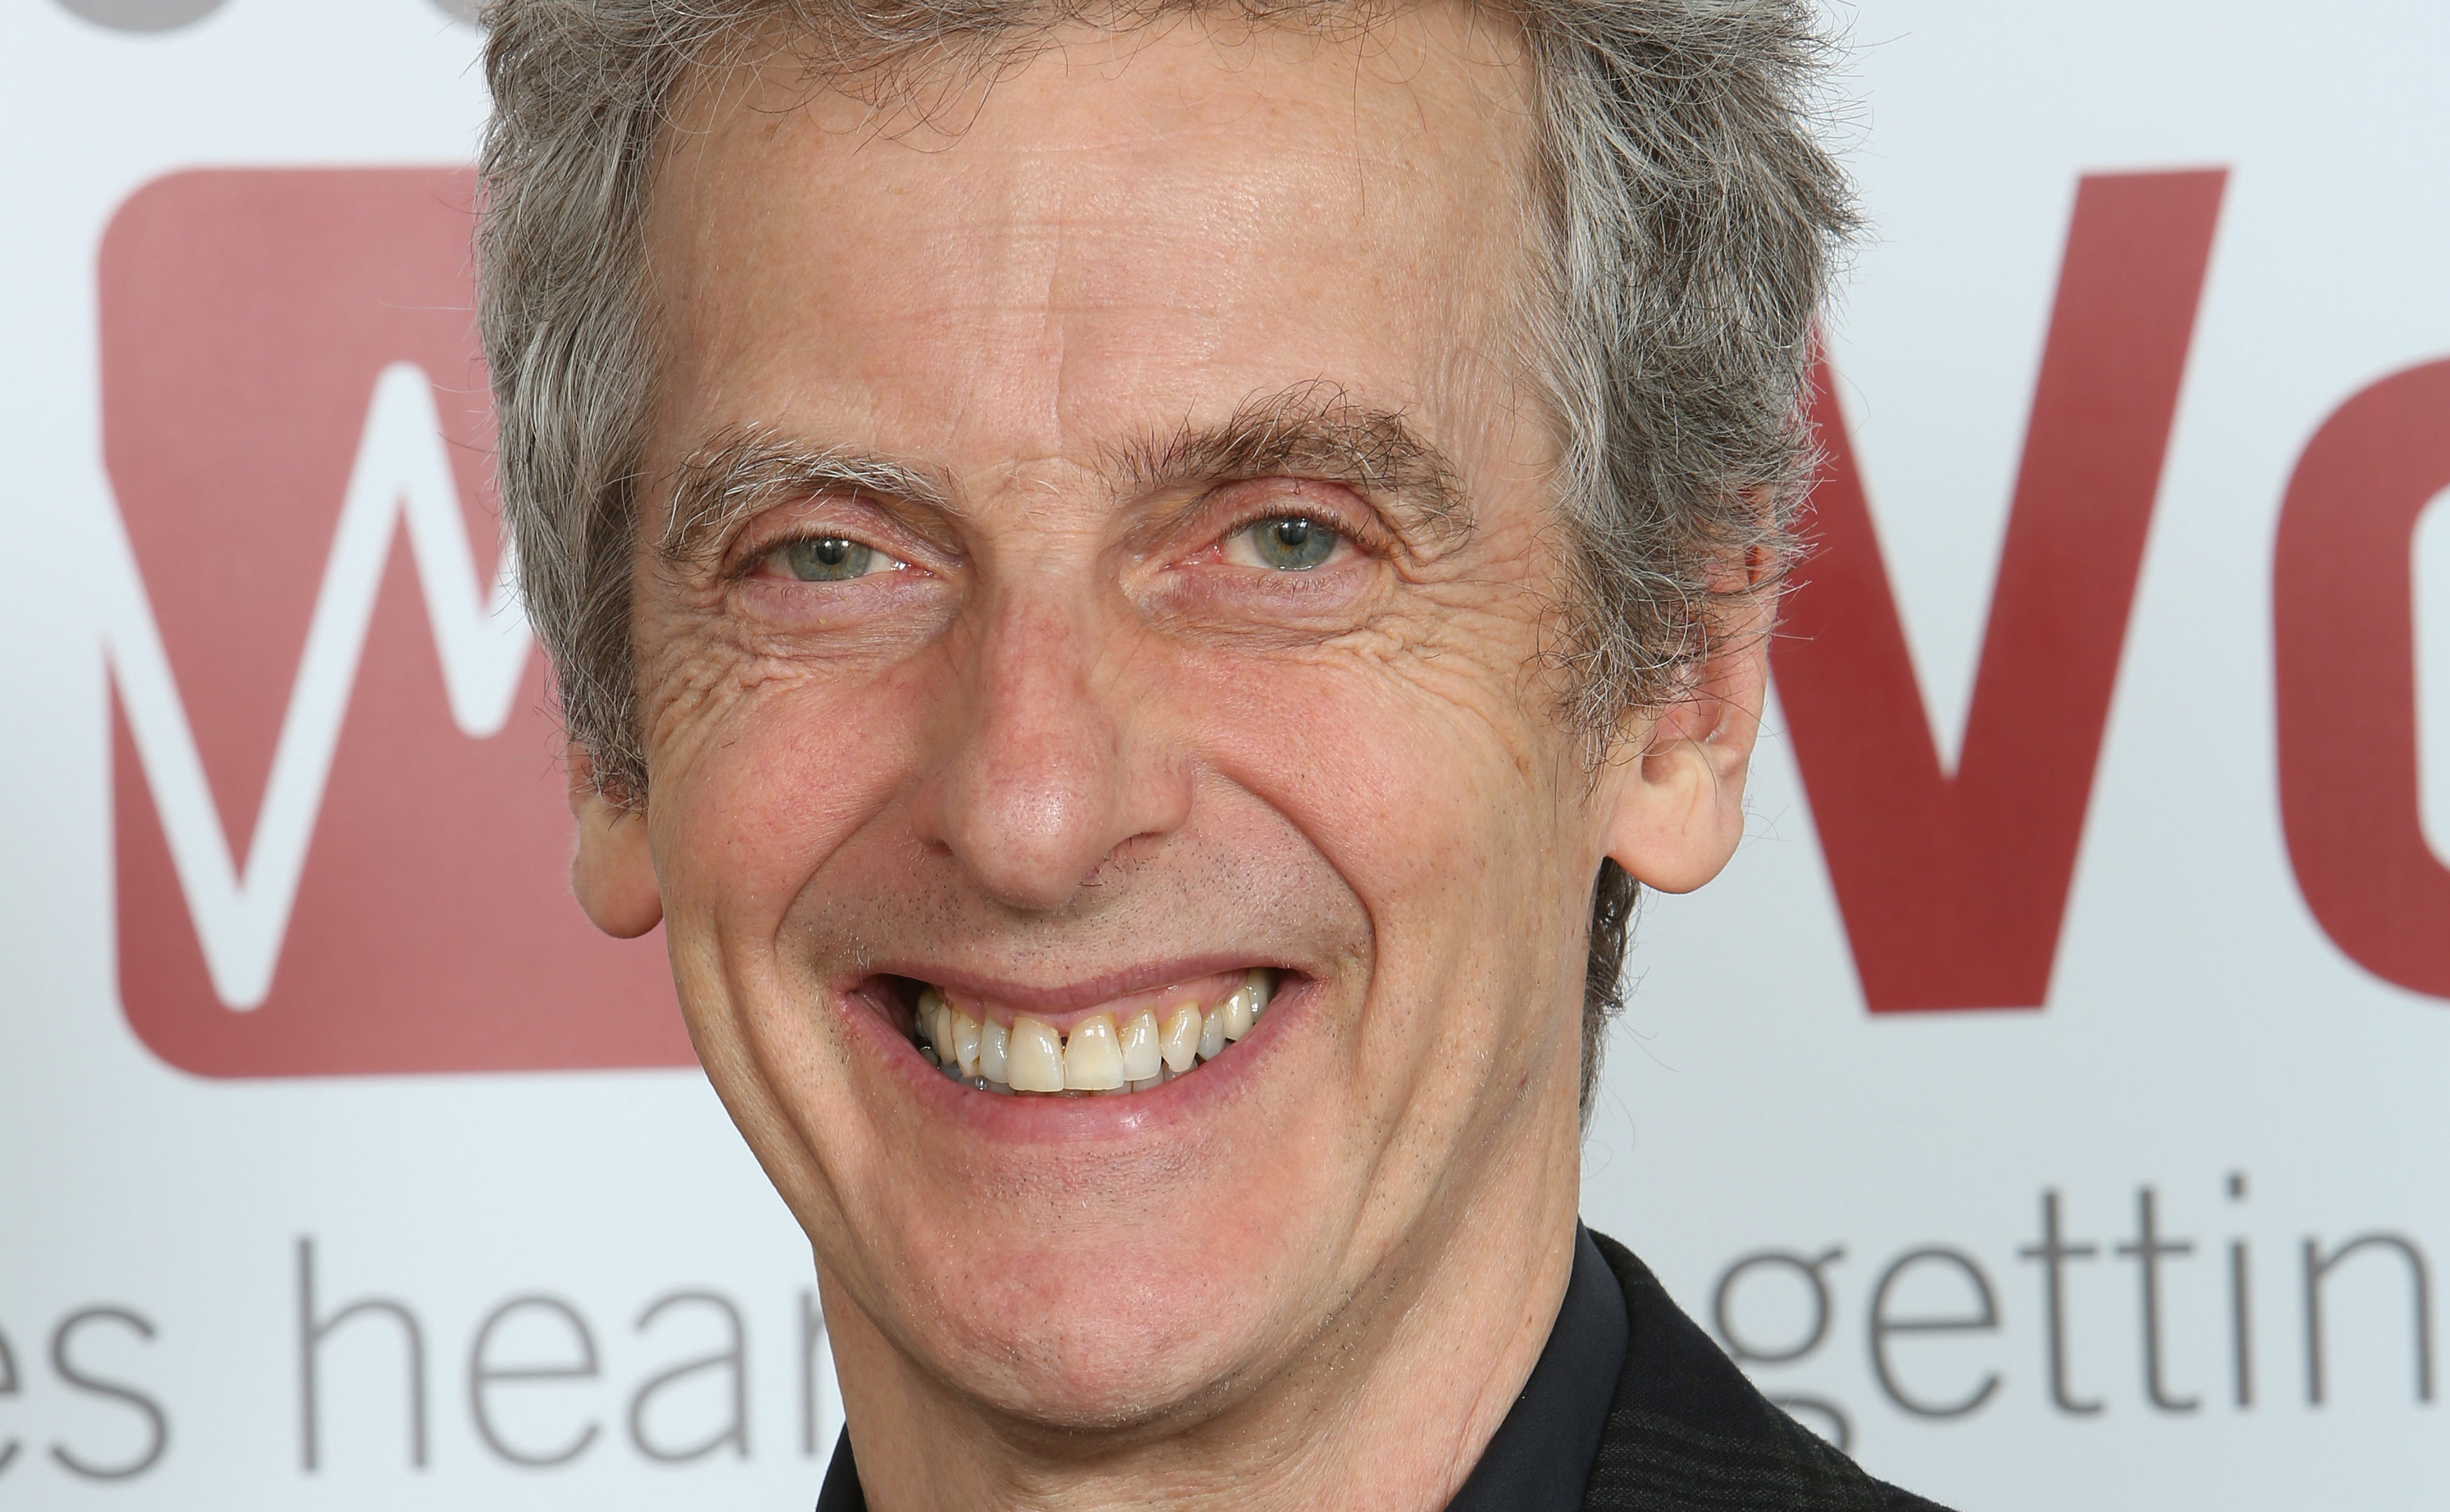 Peter Capaldi hosted the ceremony